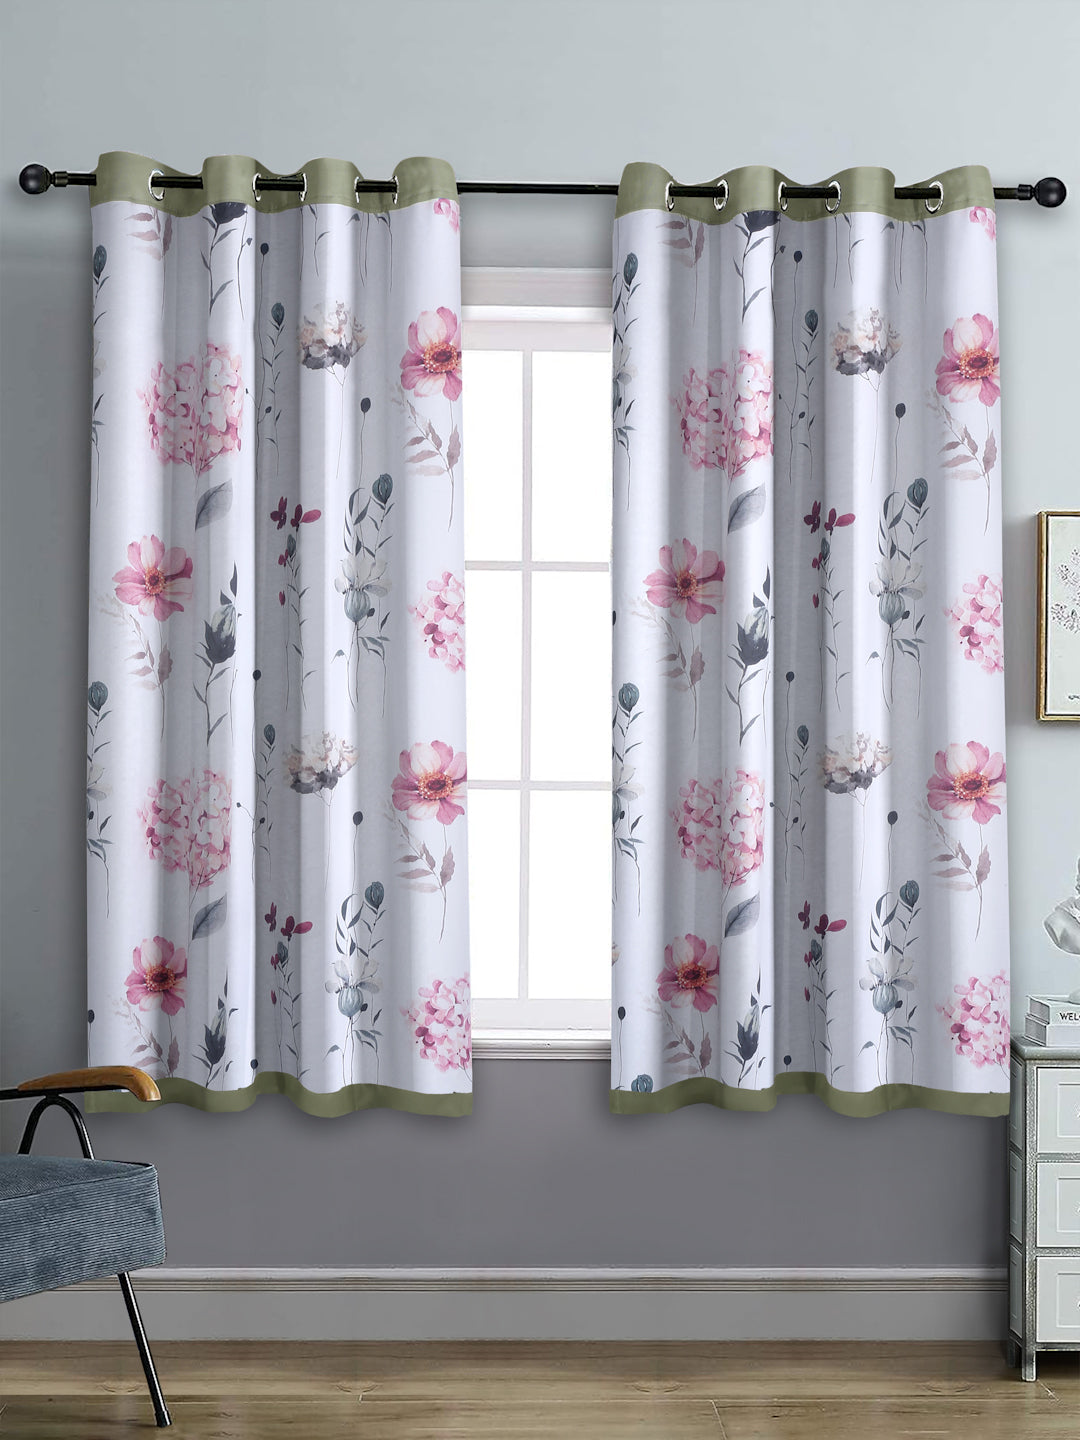 Reversible Floral Printed Blackout Curtains Set of 2- Grey